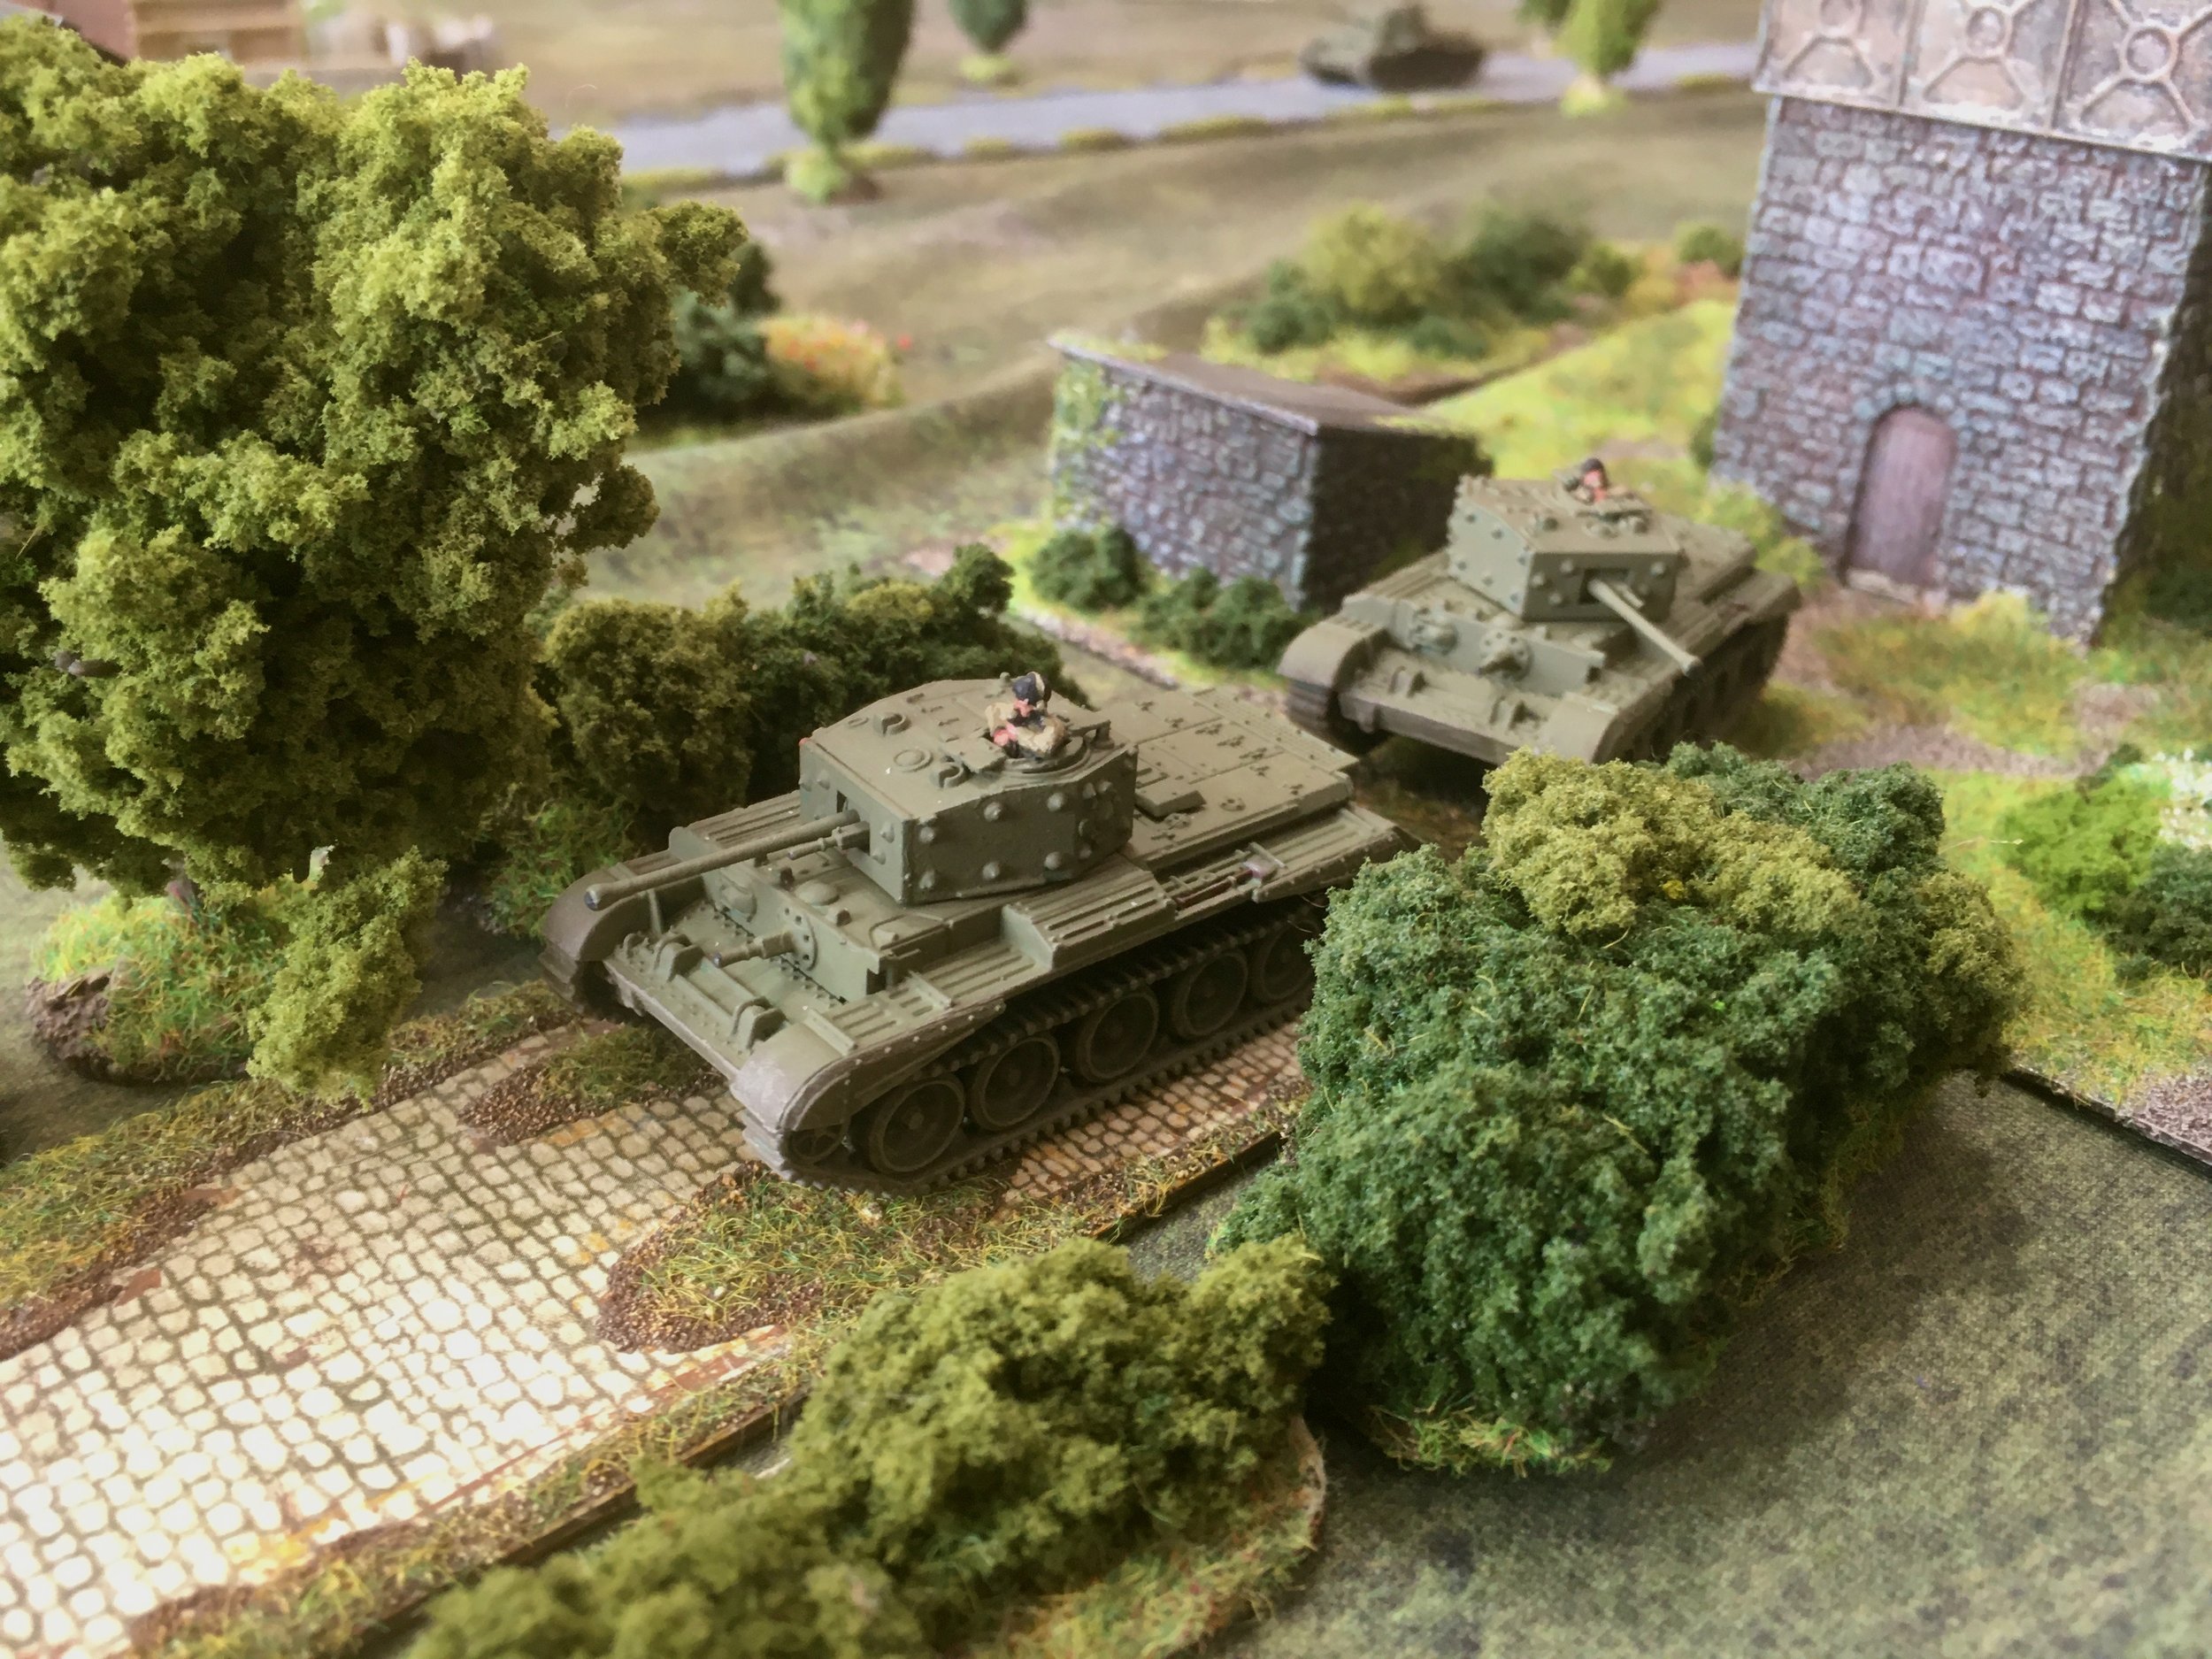 Whilst the first tanks of C Squadron 2nd Welsh Guards advance towards the town - let's give the Hun some Welsh sugar boyos!